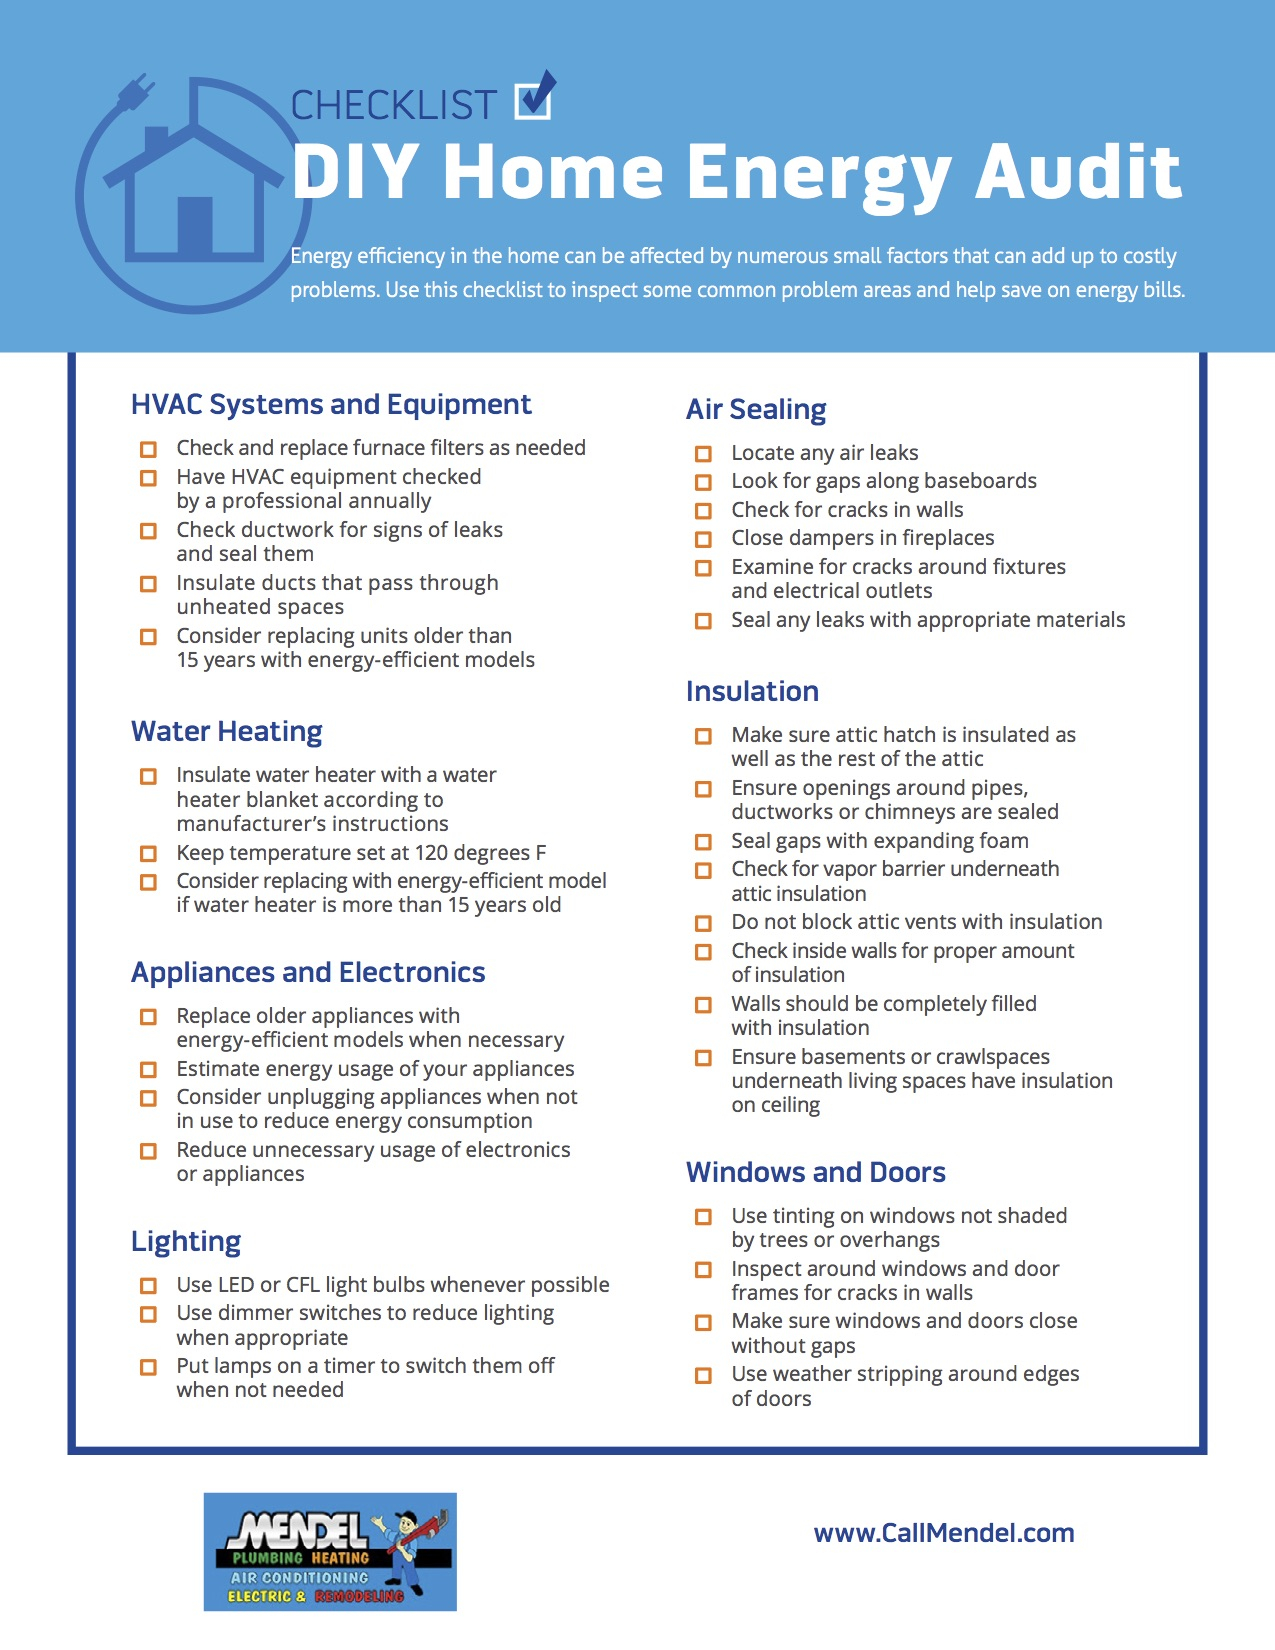 Checklist For Performing A DIY Home Energy Audit from Mendel Intended For Energy Audit Checklist Template Pertaining To Energy Audit Checklist Template